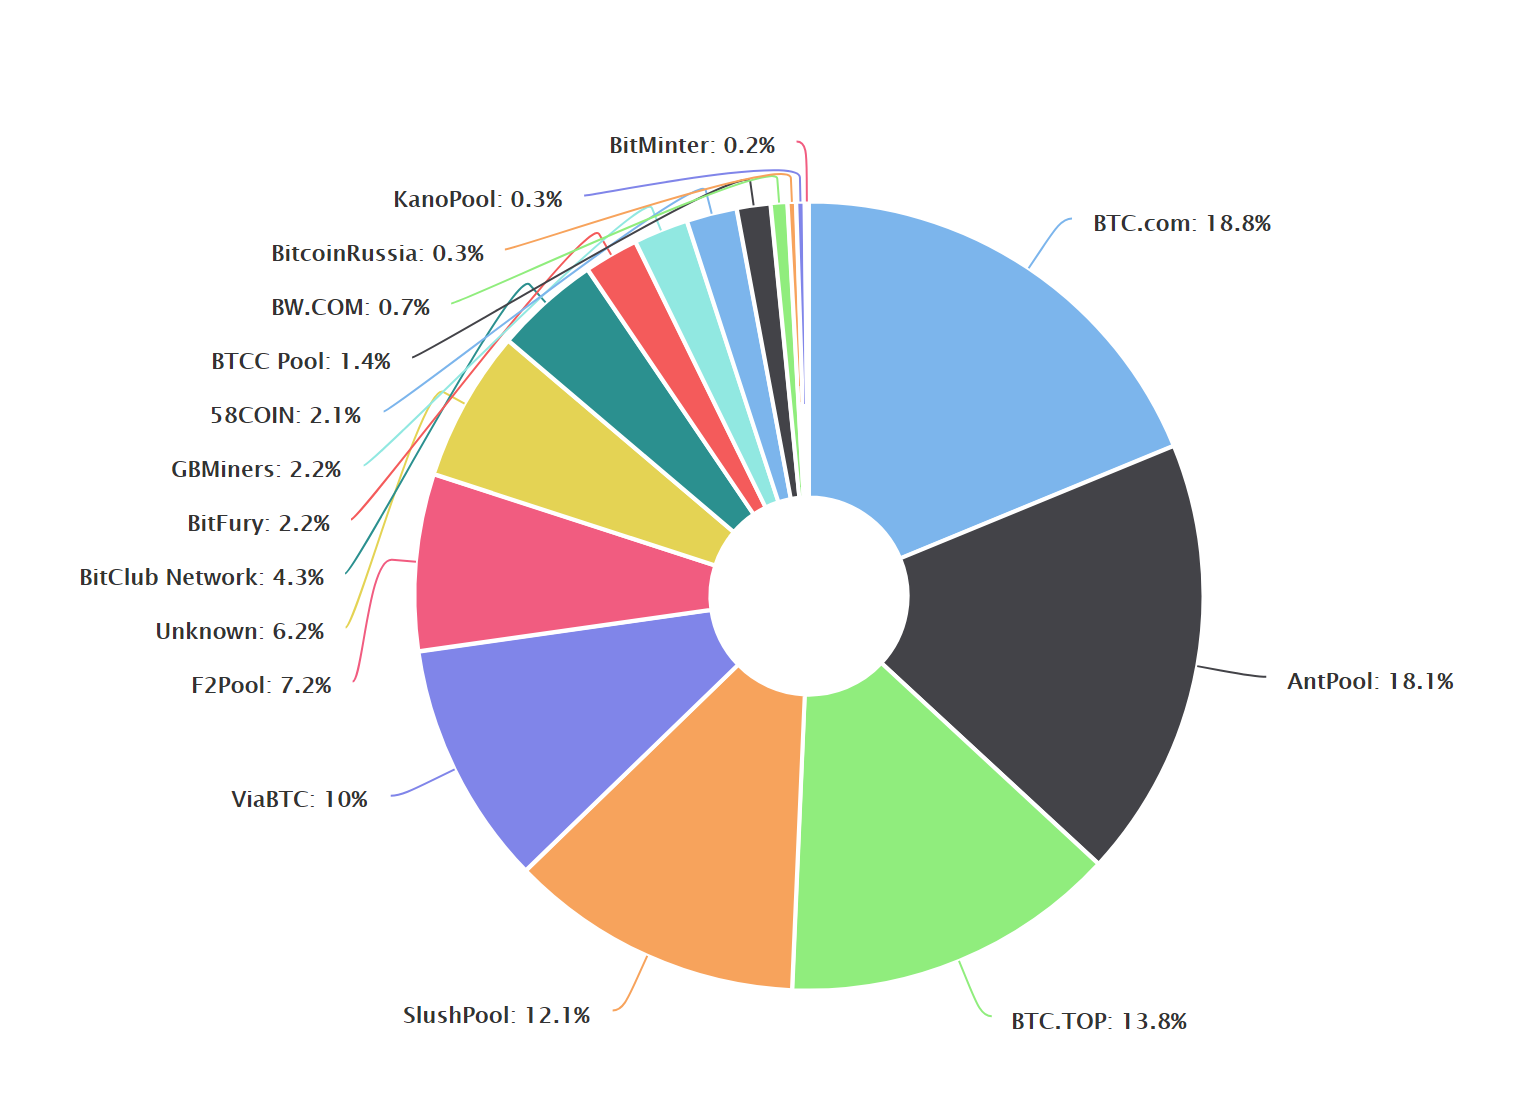 What is the share of the mining pool